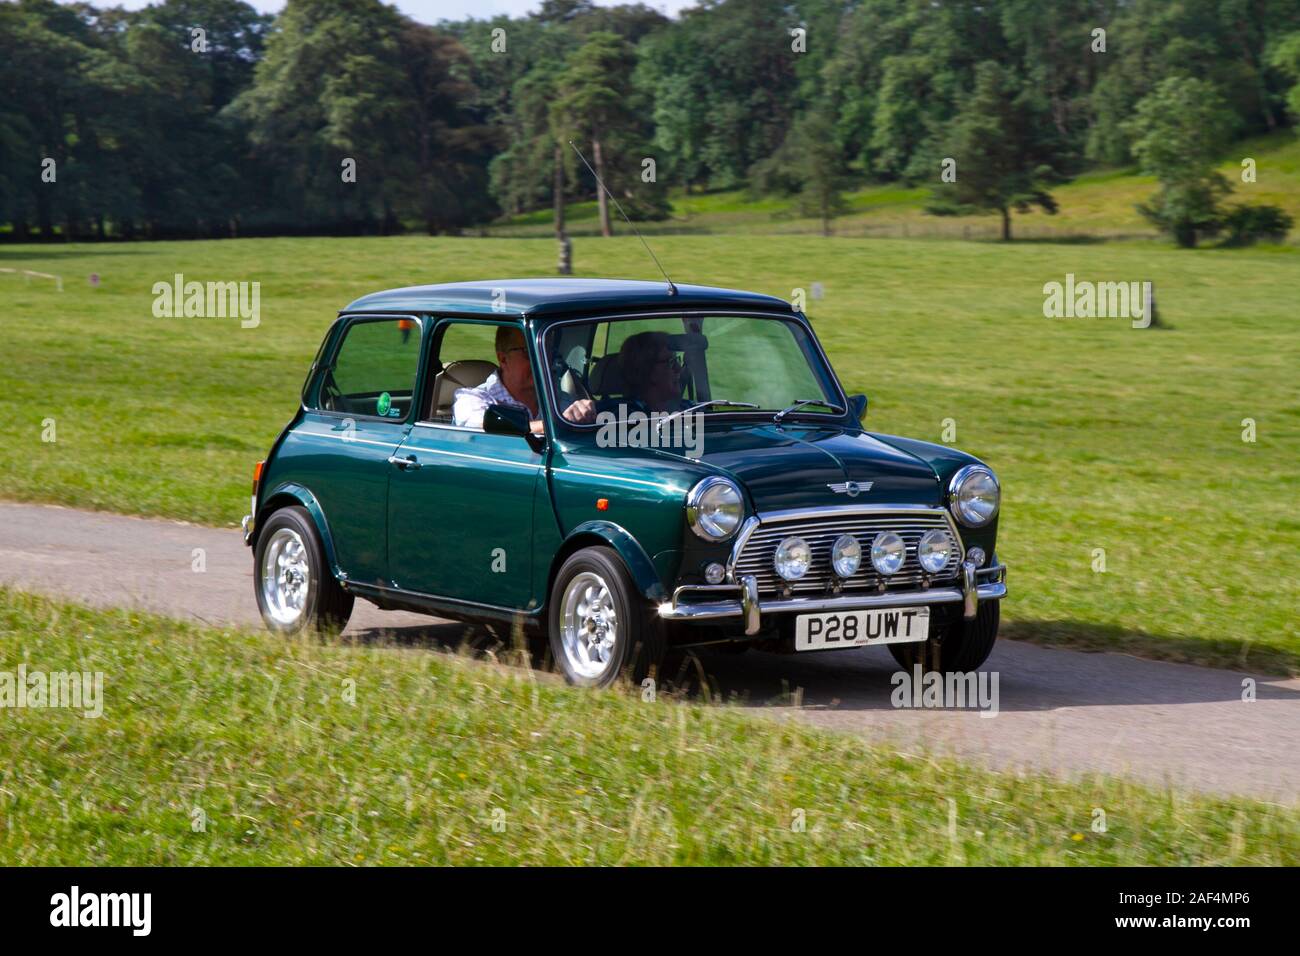 1997 90s green Rover Mini 1.3 MPI ; Classic cars, historics, cherished, old timers, collectable restored vintage veteran, vehicles of yesteryear arriving for the Mark Woodward historical motoring event at Leighton Hall, Carnforth, UK Stock Photo